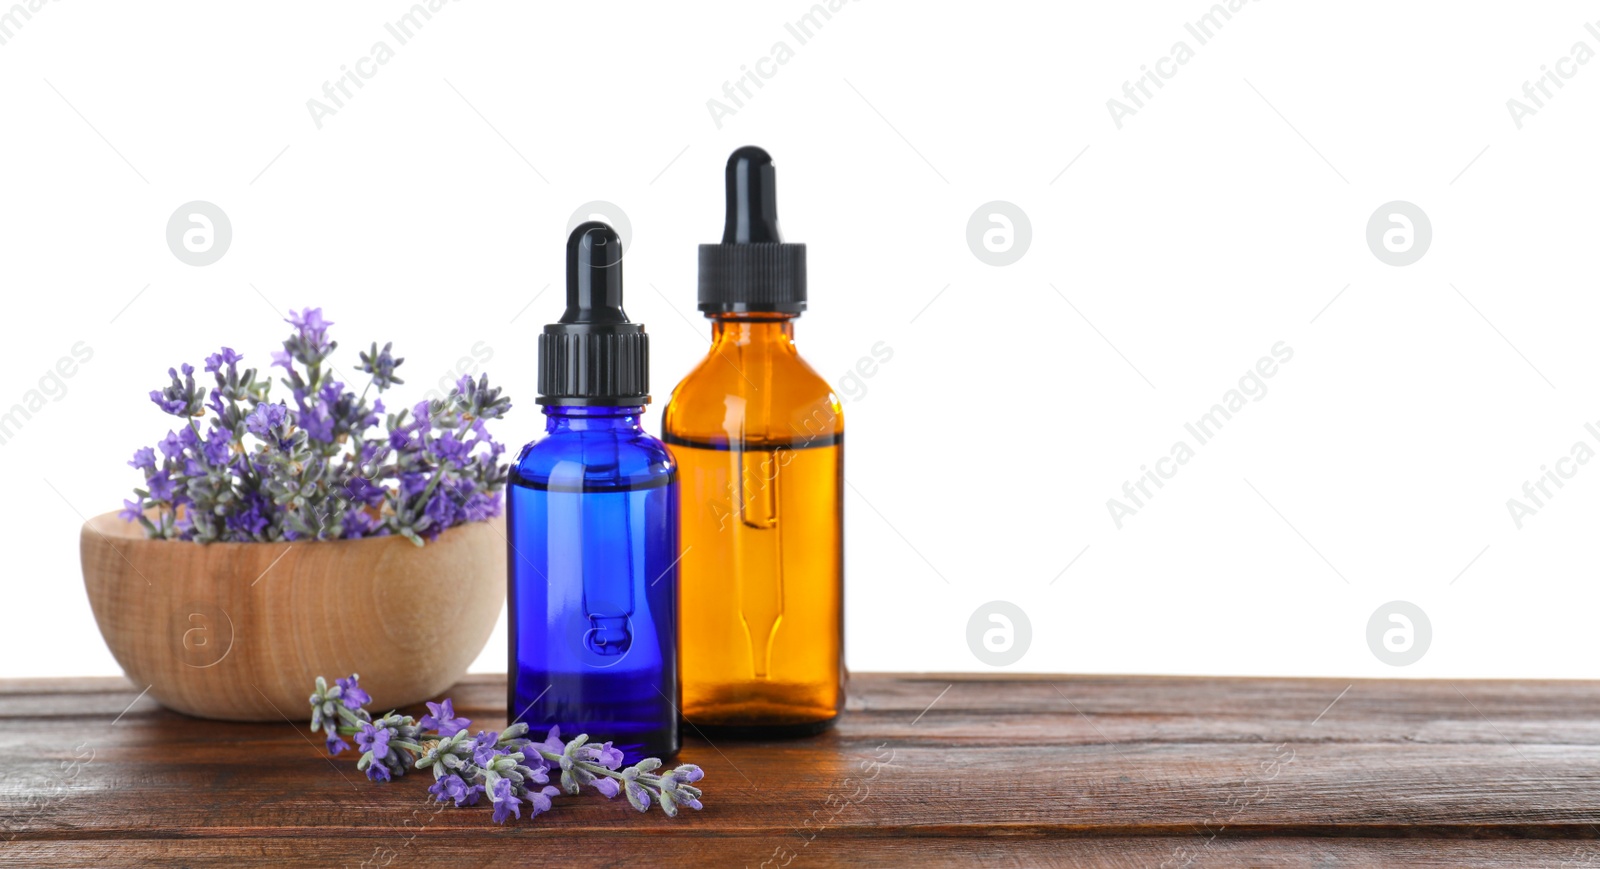 Photo of Bottles of essential oil and bowl with lavender on wooden table against white background